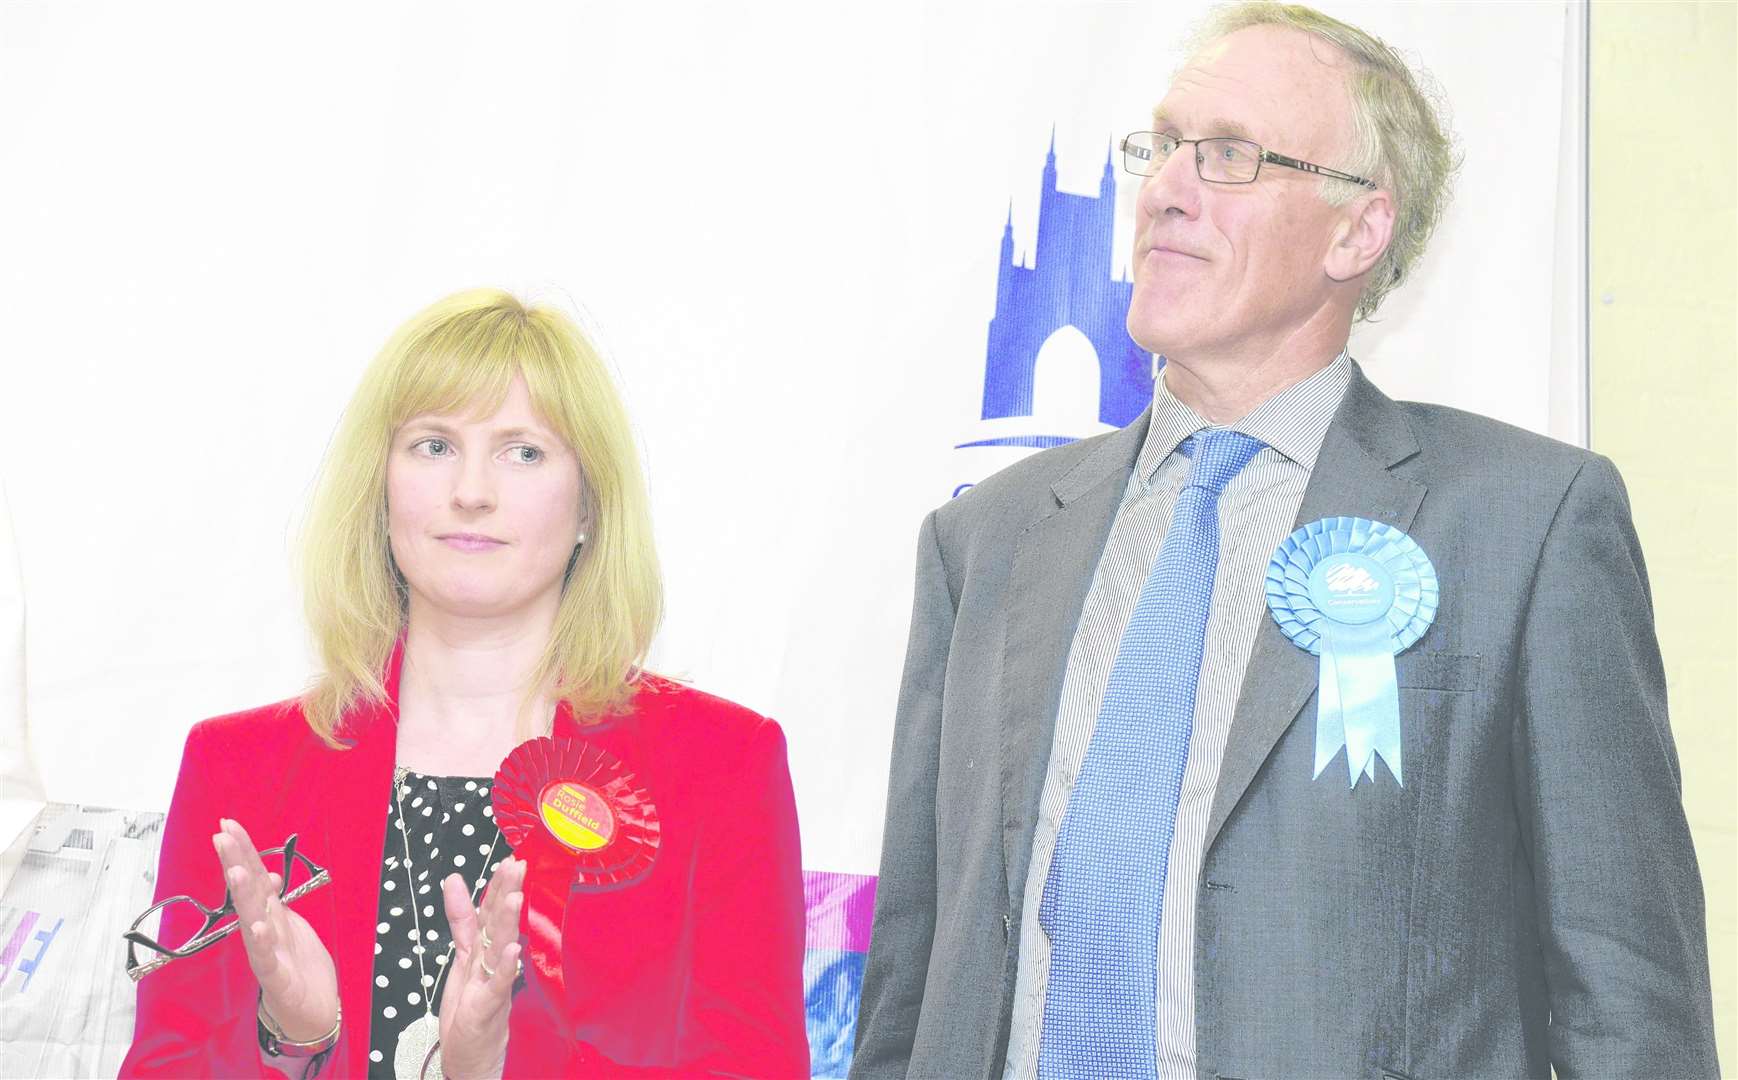 Labour's Rosie Duffield beat Julian Brazier to become MP for Canterbury